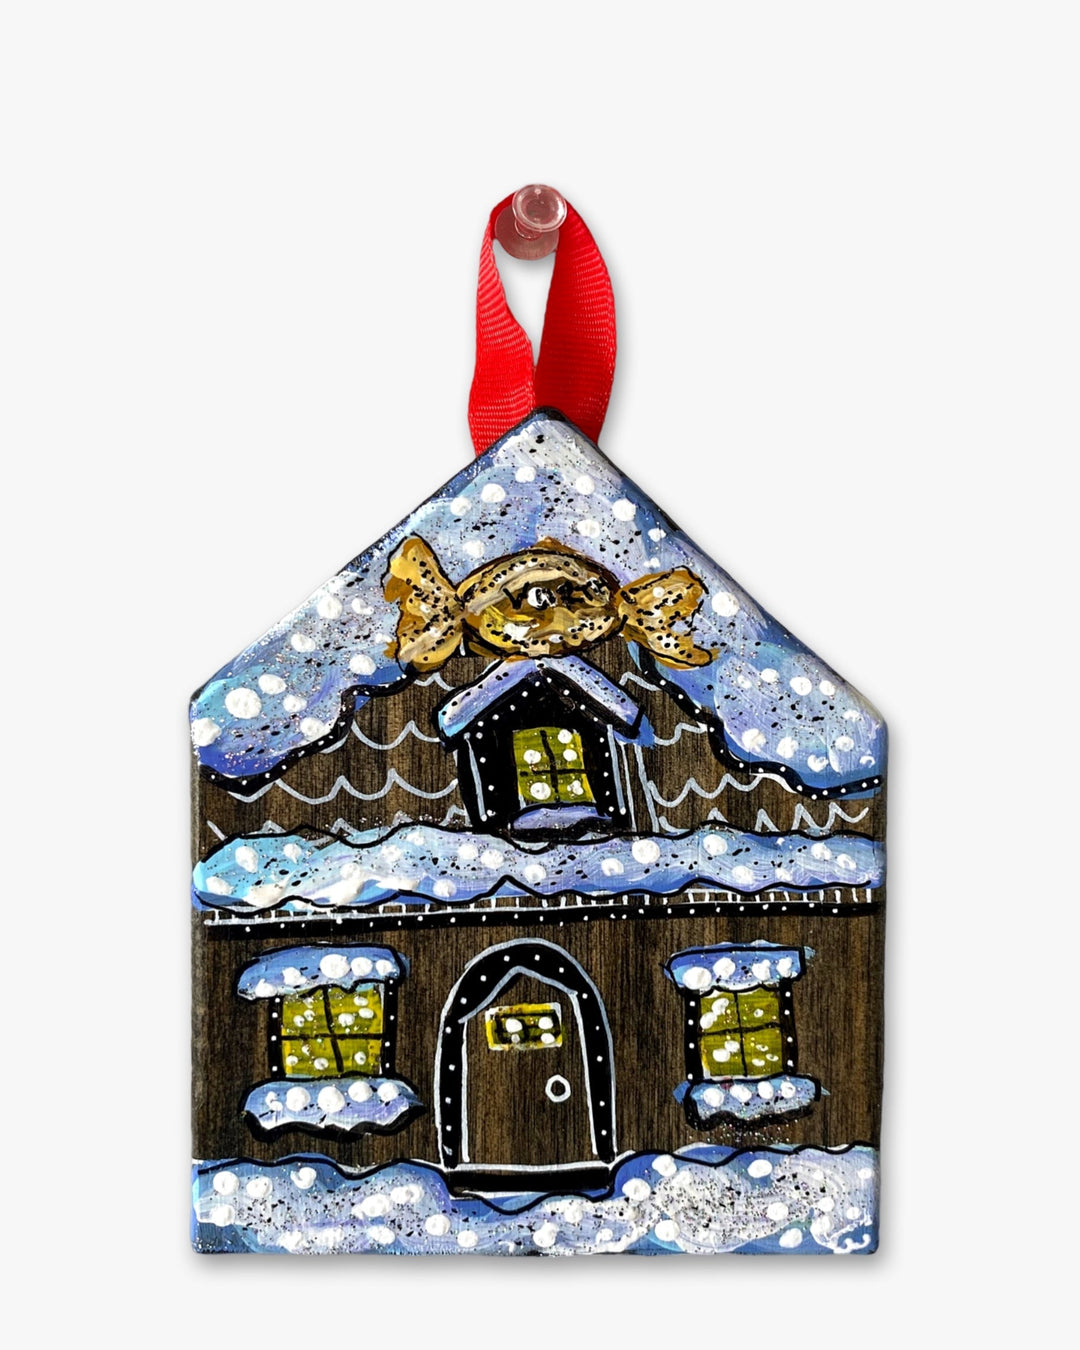 Grandma’s Candy Gingerbread Cottage - Hand Painted Ornament - Heather Freitas 